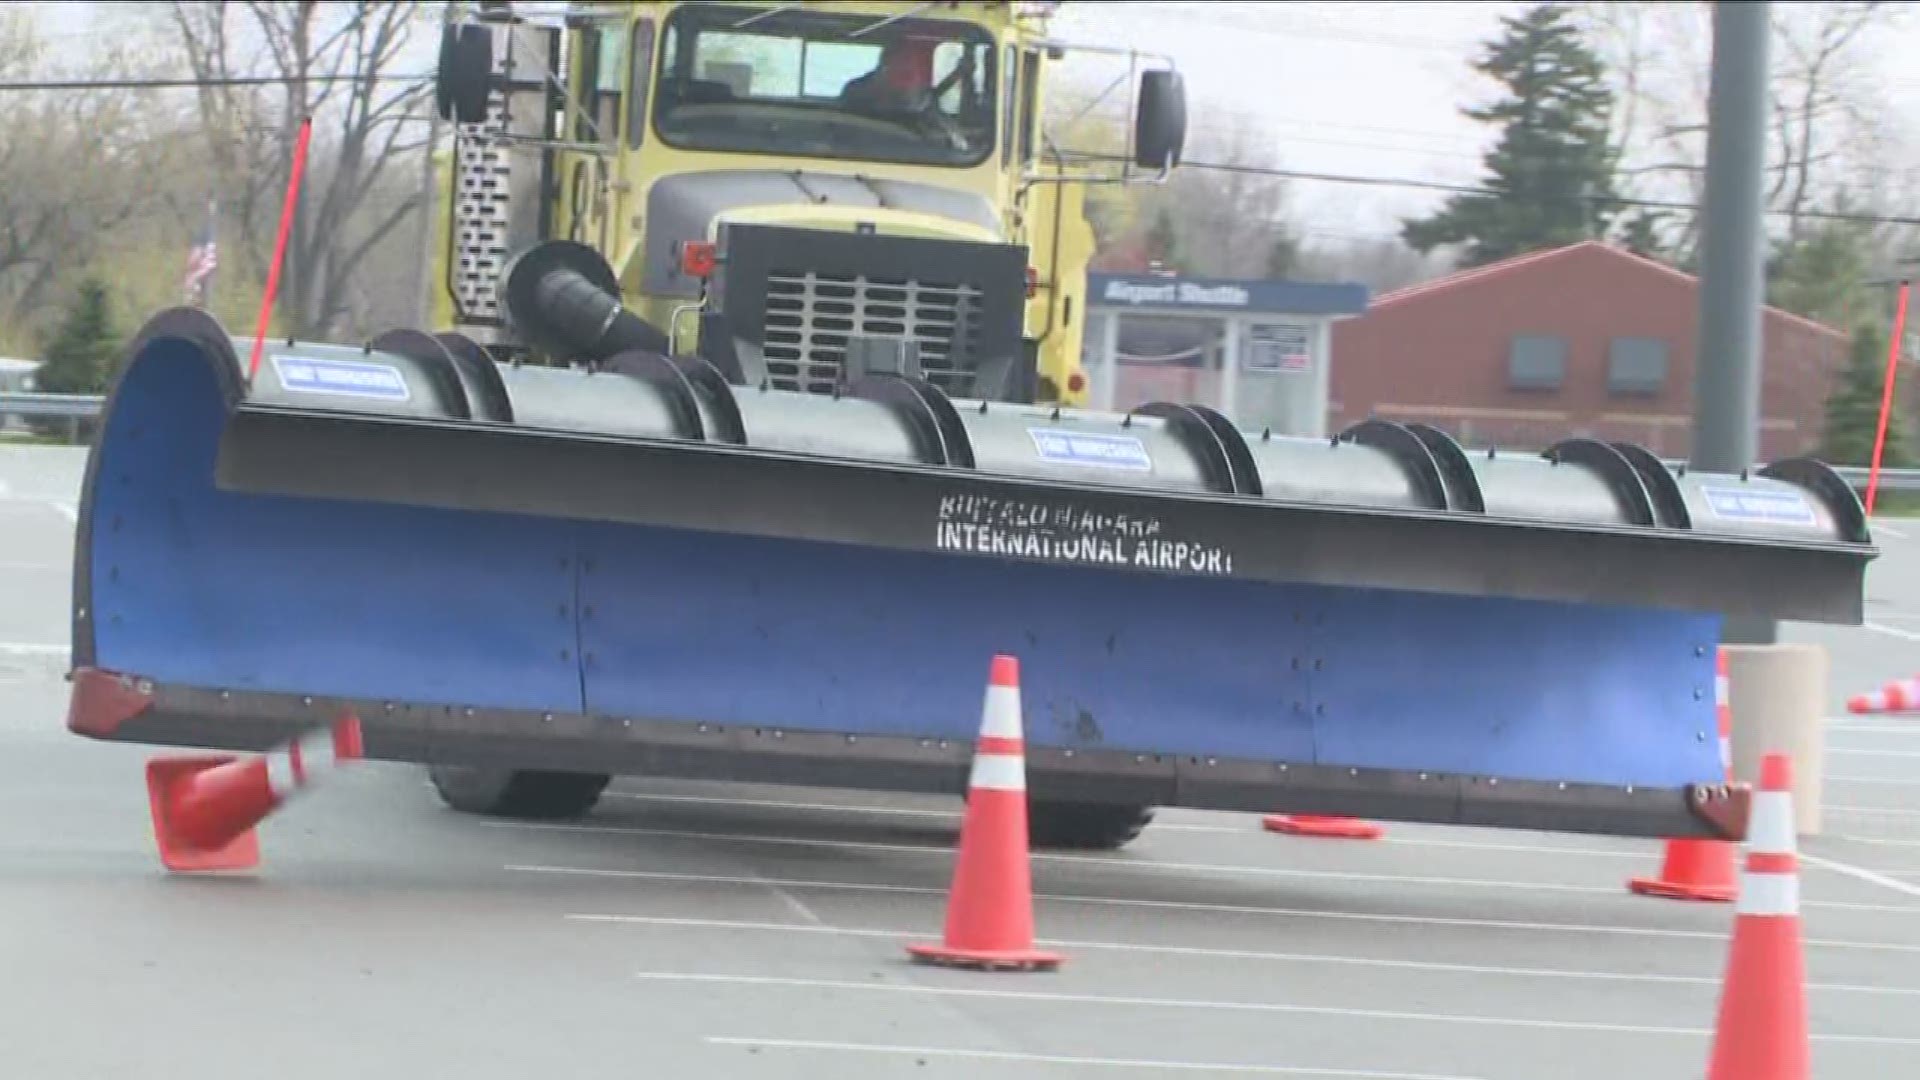 Drivers who work on clearing snow at airports all over went through a timed obstacle course...